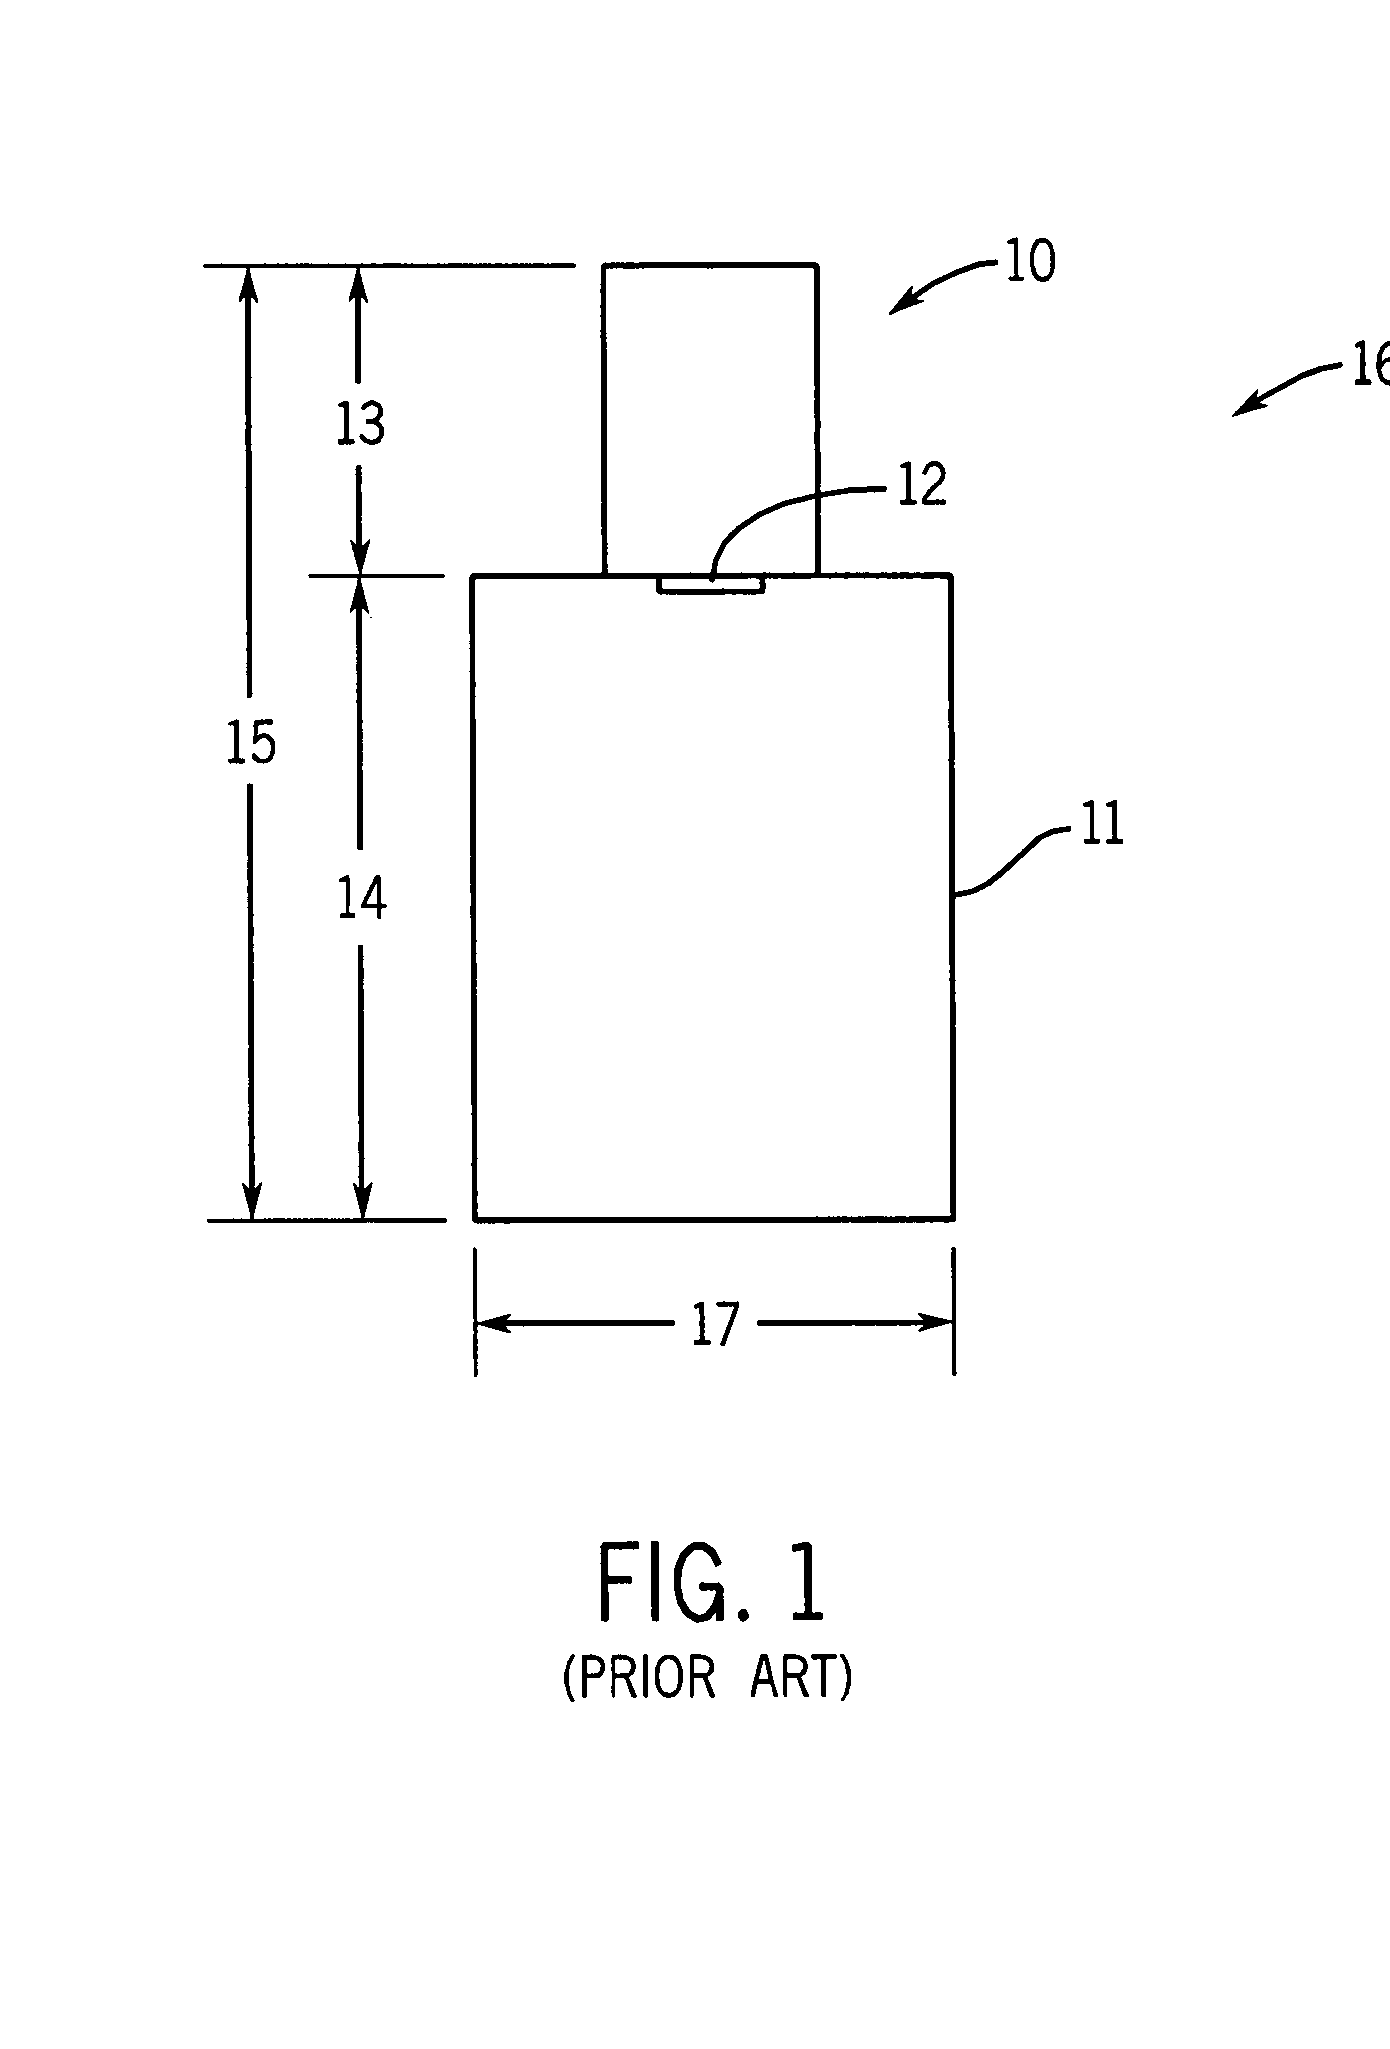 Multi-stage mechanical delay mechanisms for inertial igniters for thermal batteries and the like